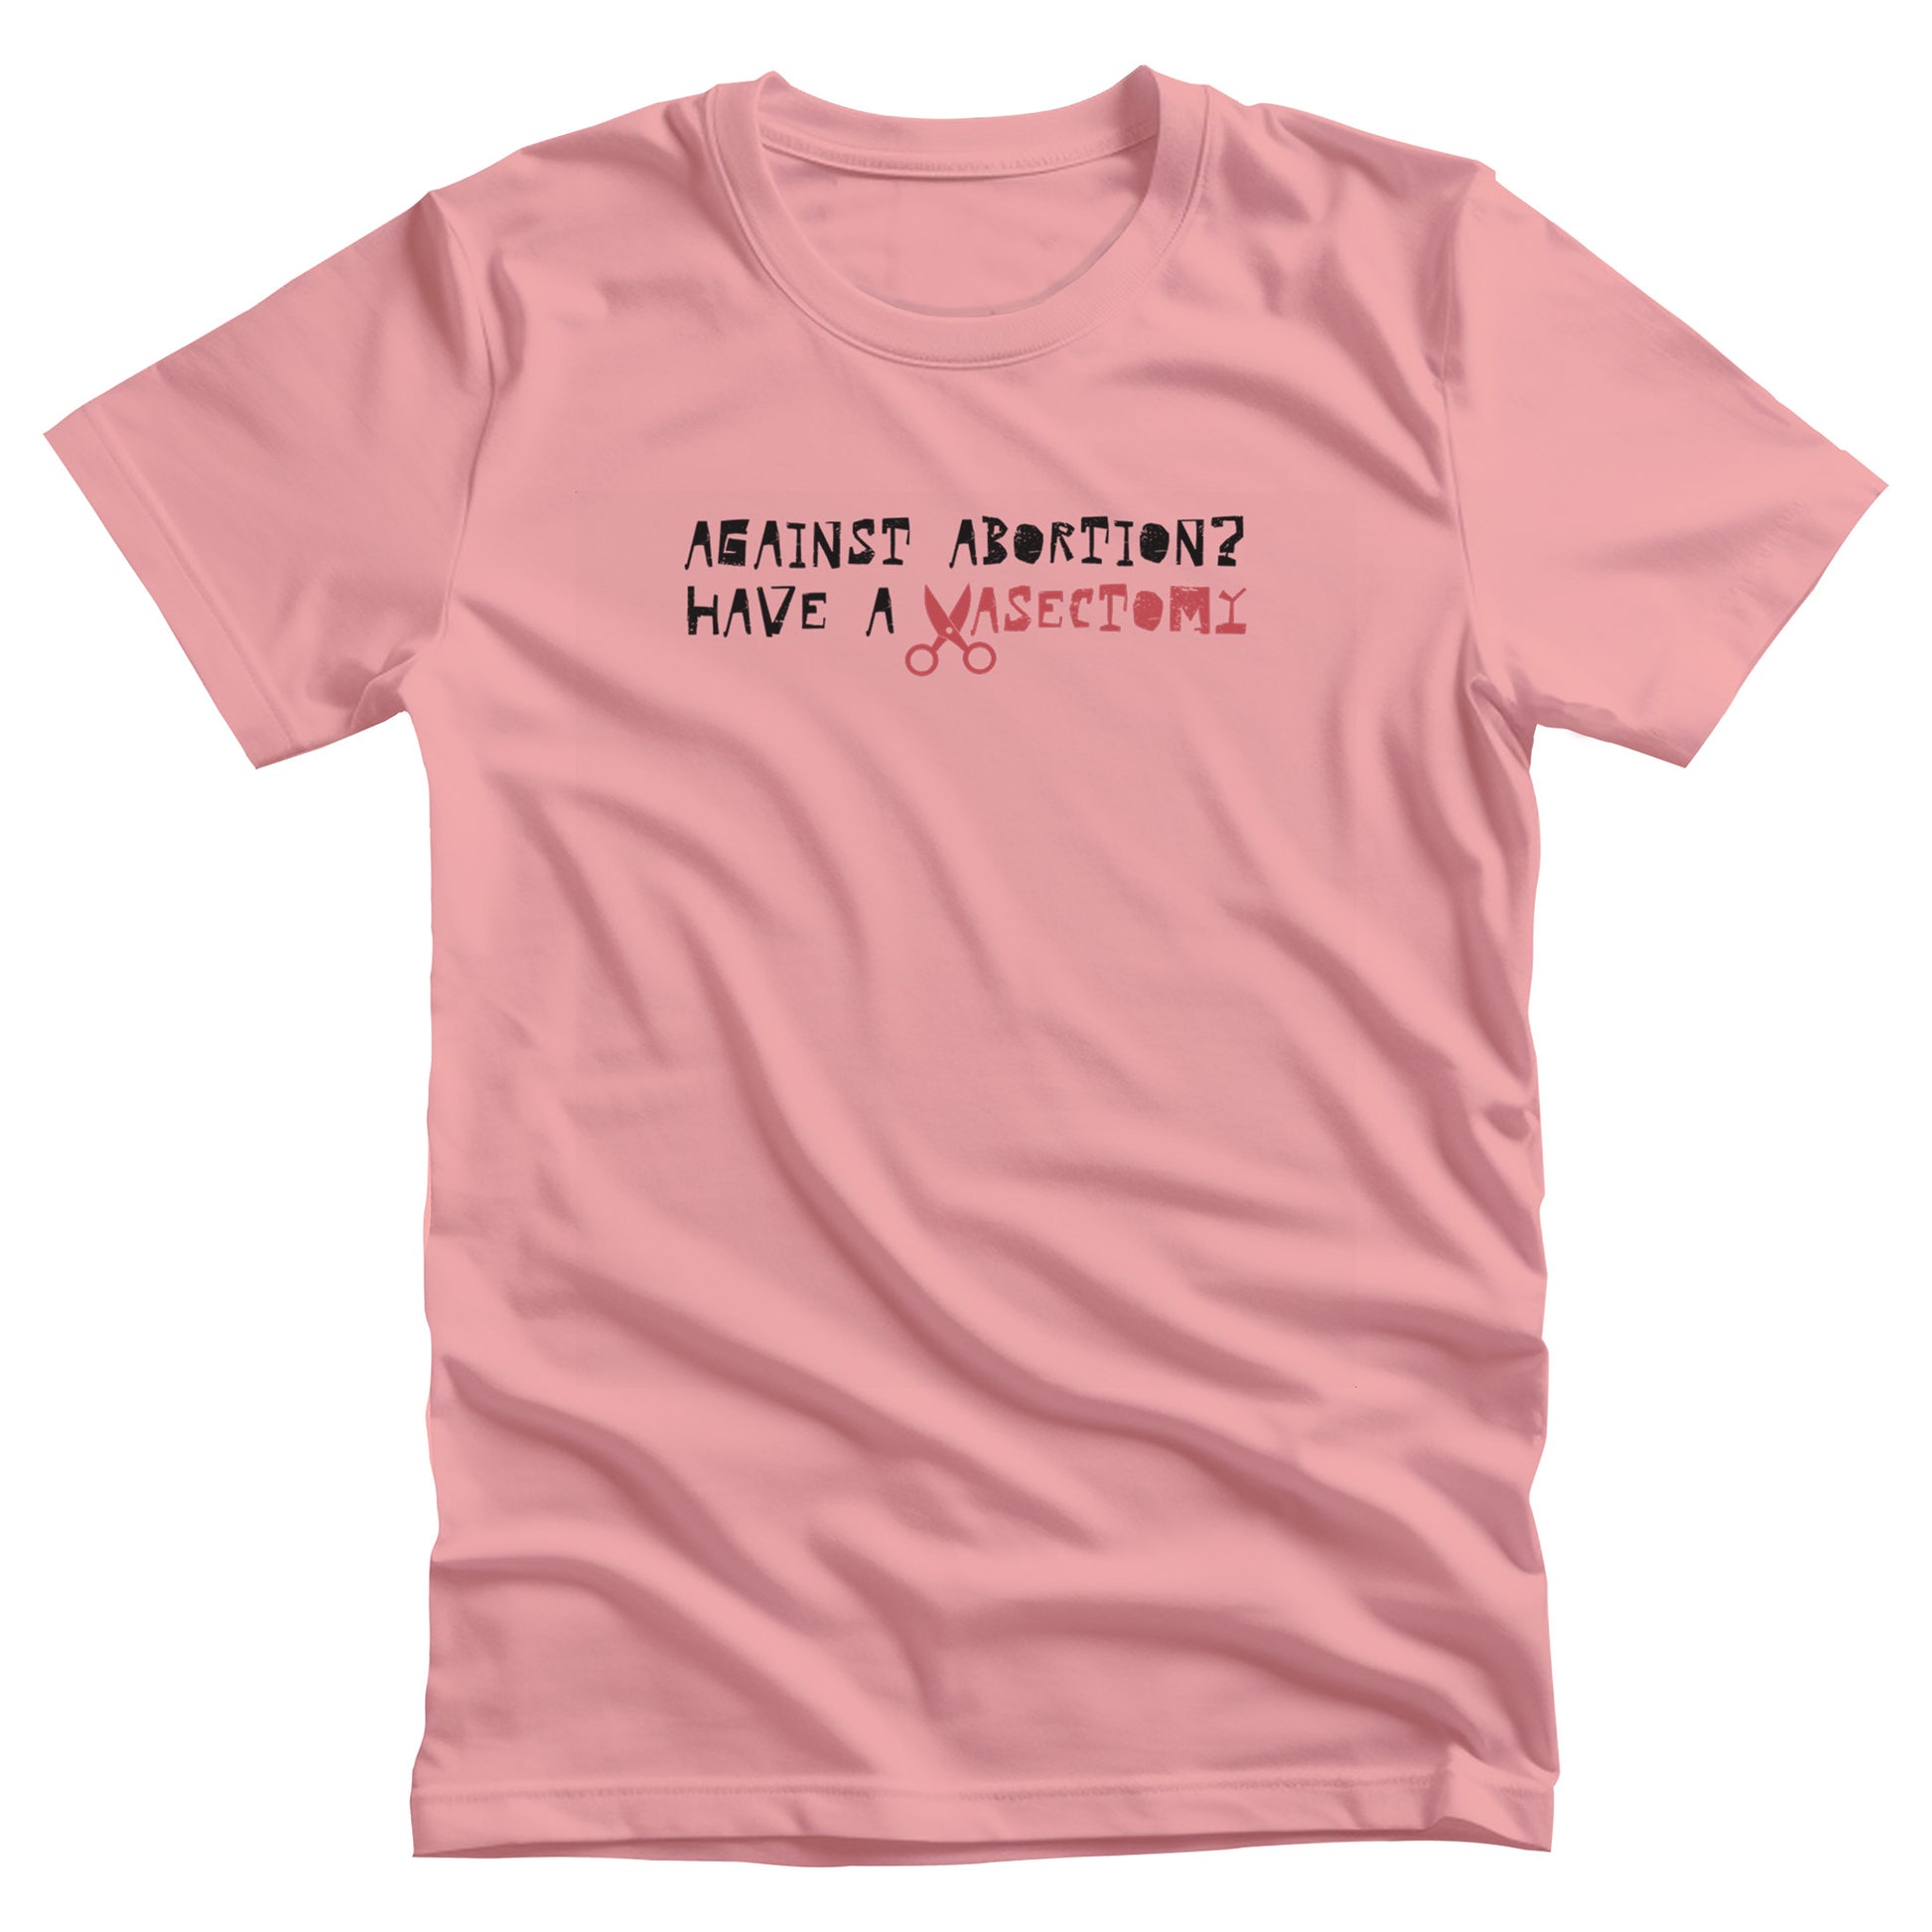 Pink unisex t-shirt that says, “Against Abortion? Have a Vasectomy” in all caps. The word “Vasectomy” is red and the “V” is scissors.